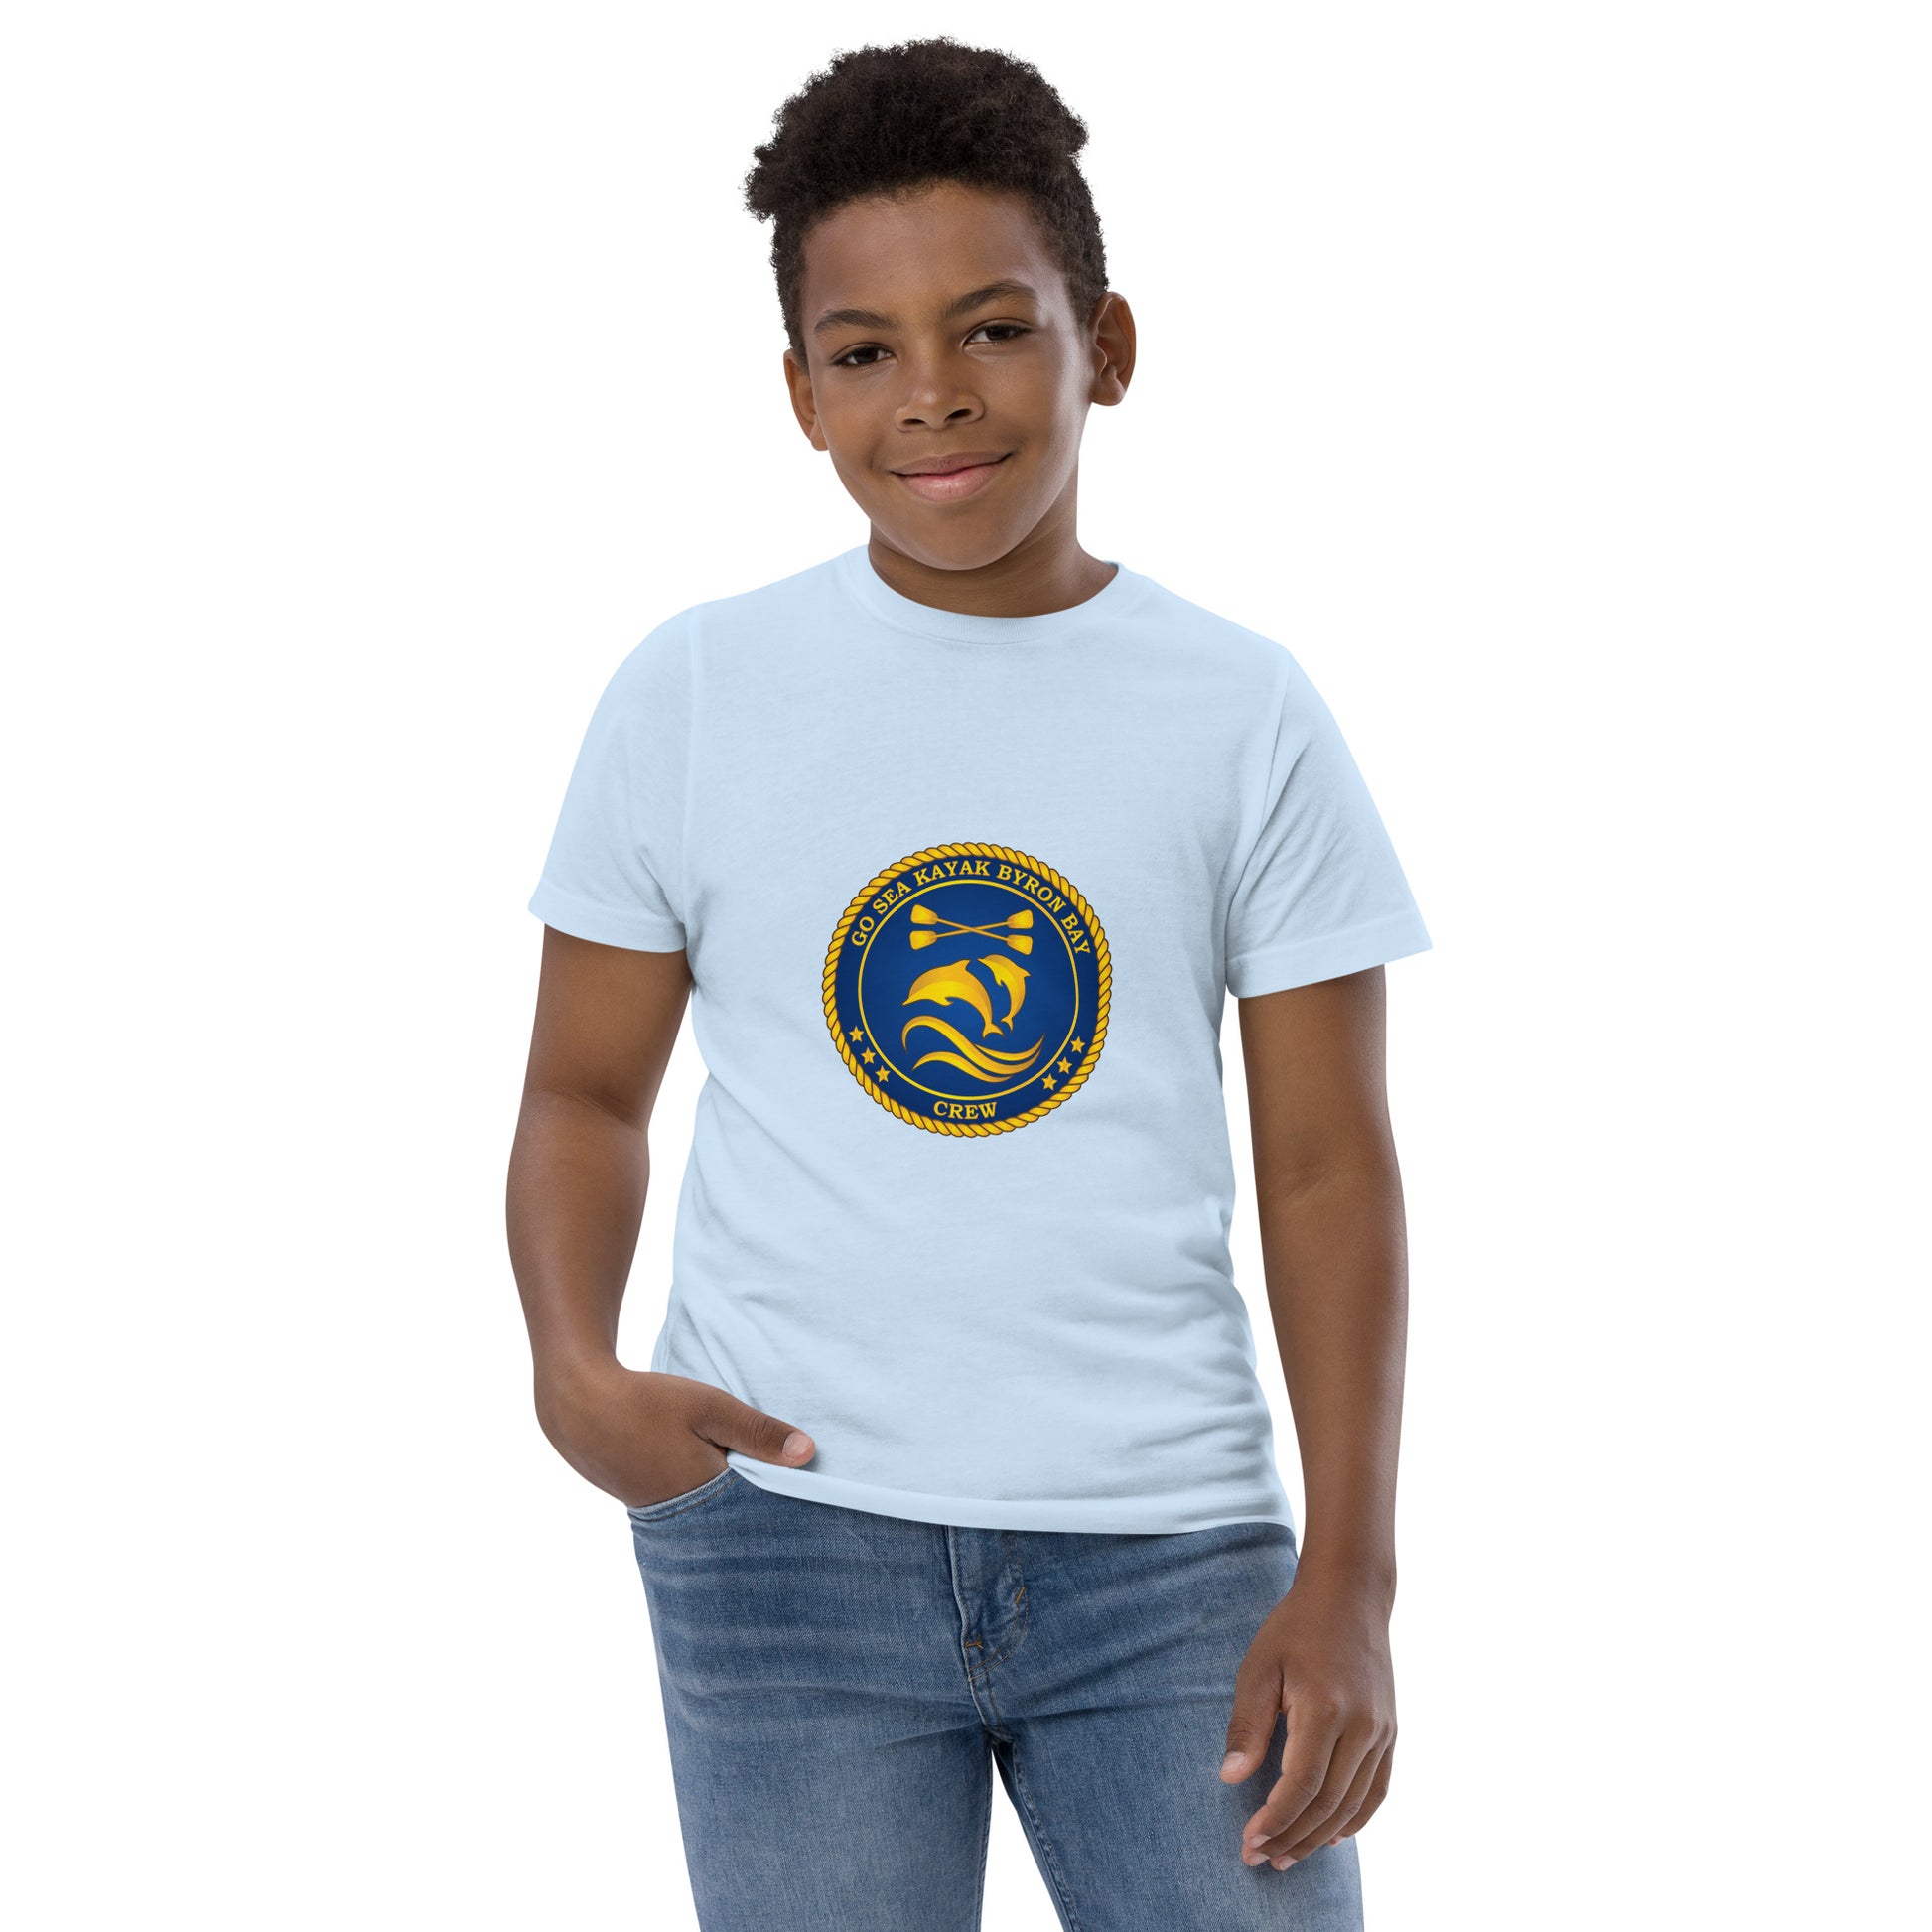  Kids T-Shirt - Light Blue - Front view, being warn on boy standing with a hand in his pocket - Go Sea Kayak Byron Bay Crew (issue 2018-2019) logo on front - Genuine Byron Bay Merchandise | Produced by Go Sea Kayak Byron Bay 